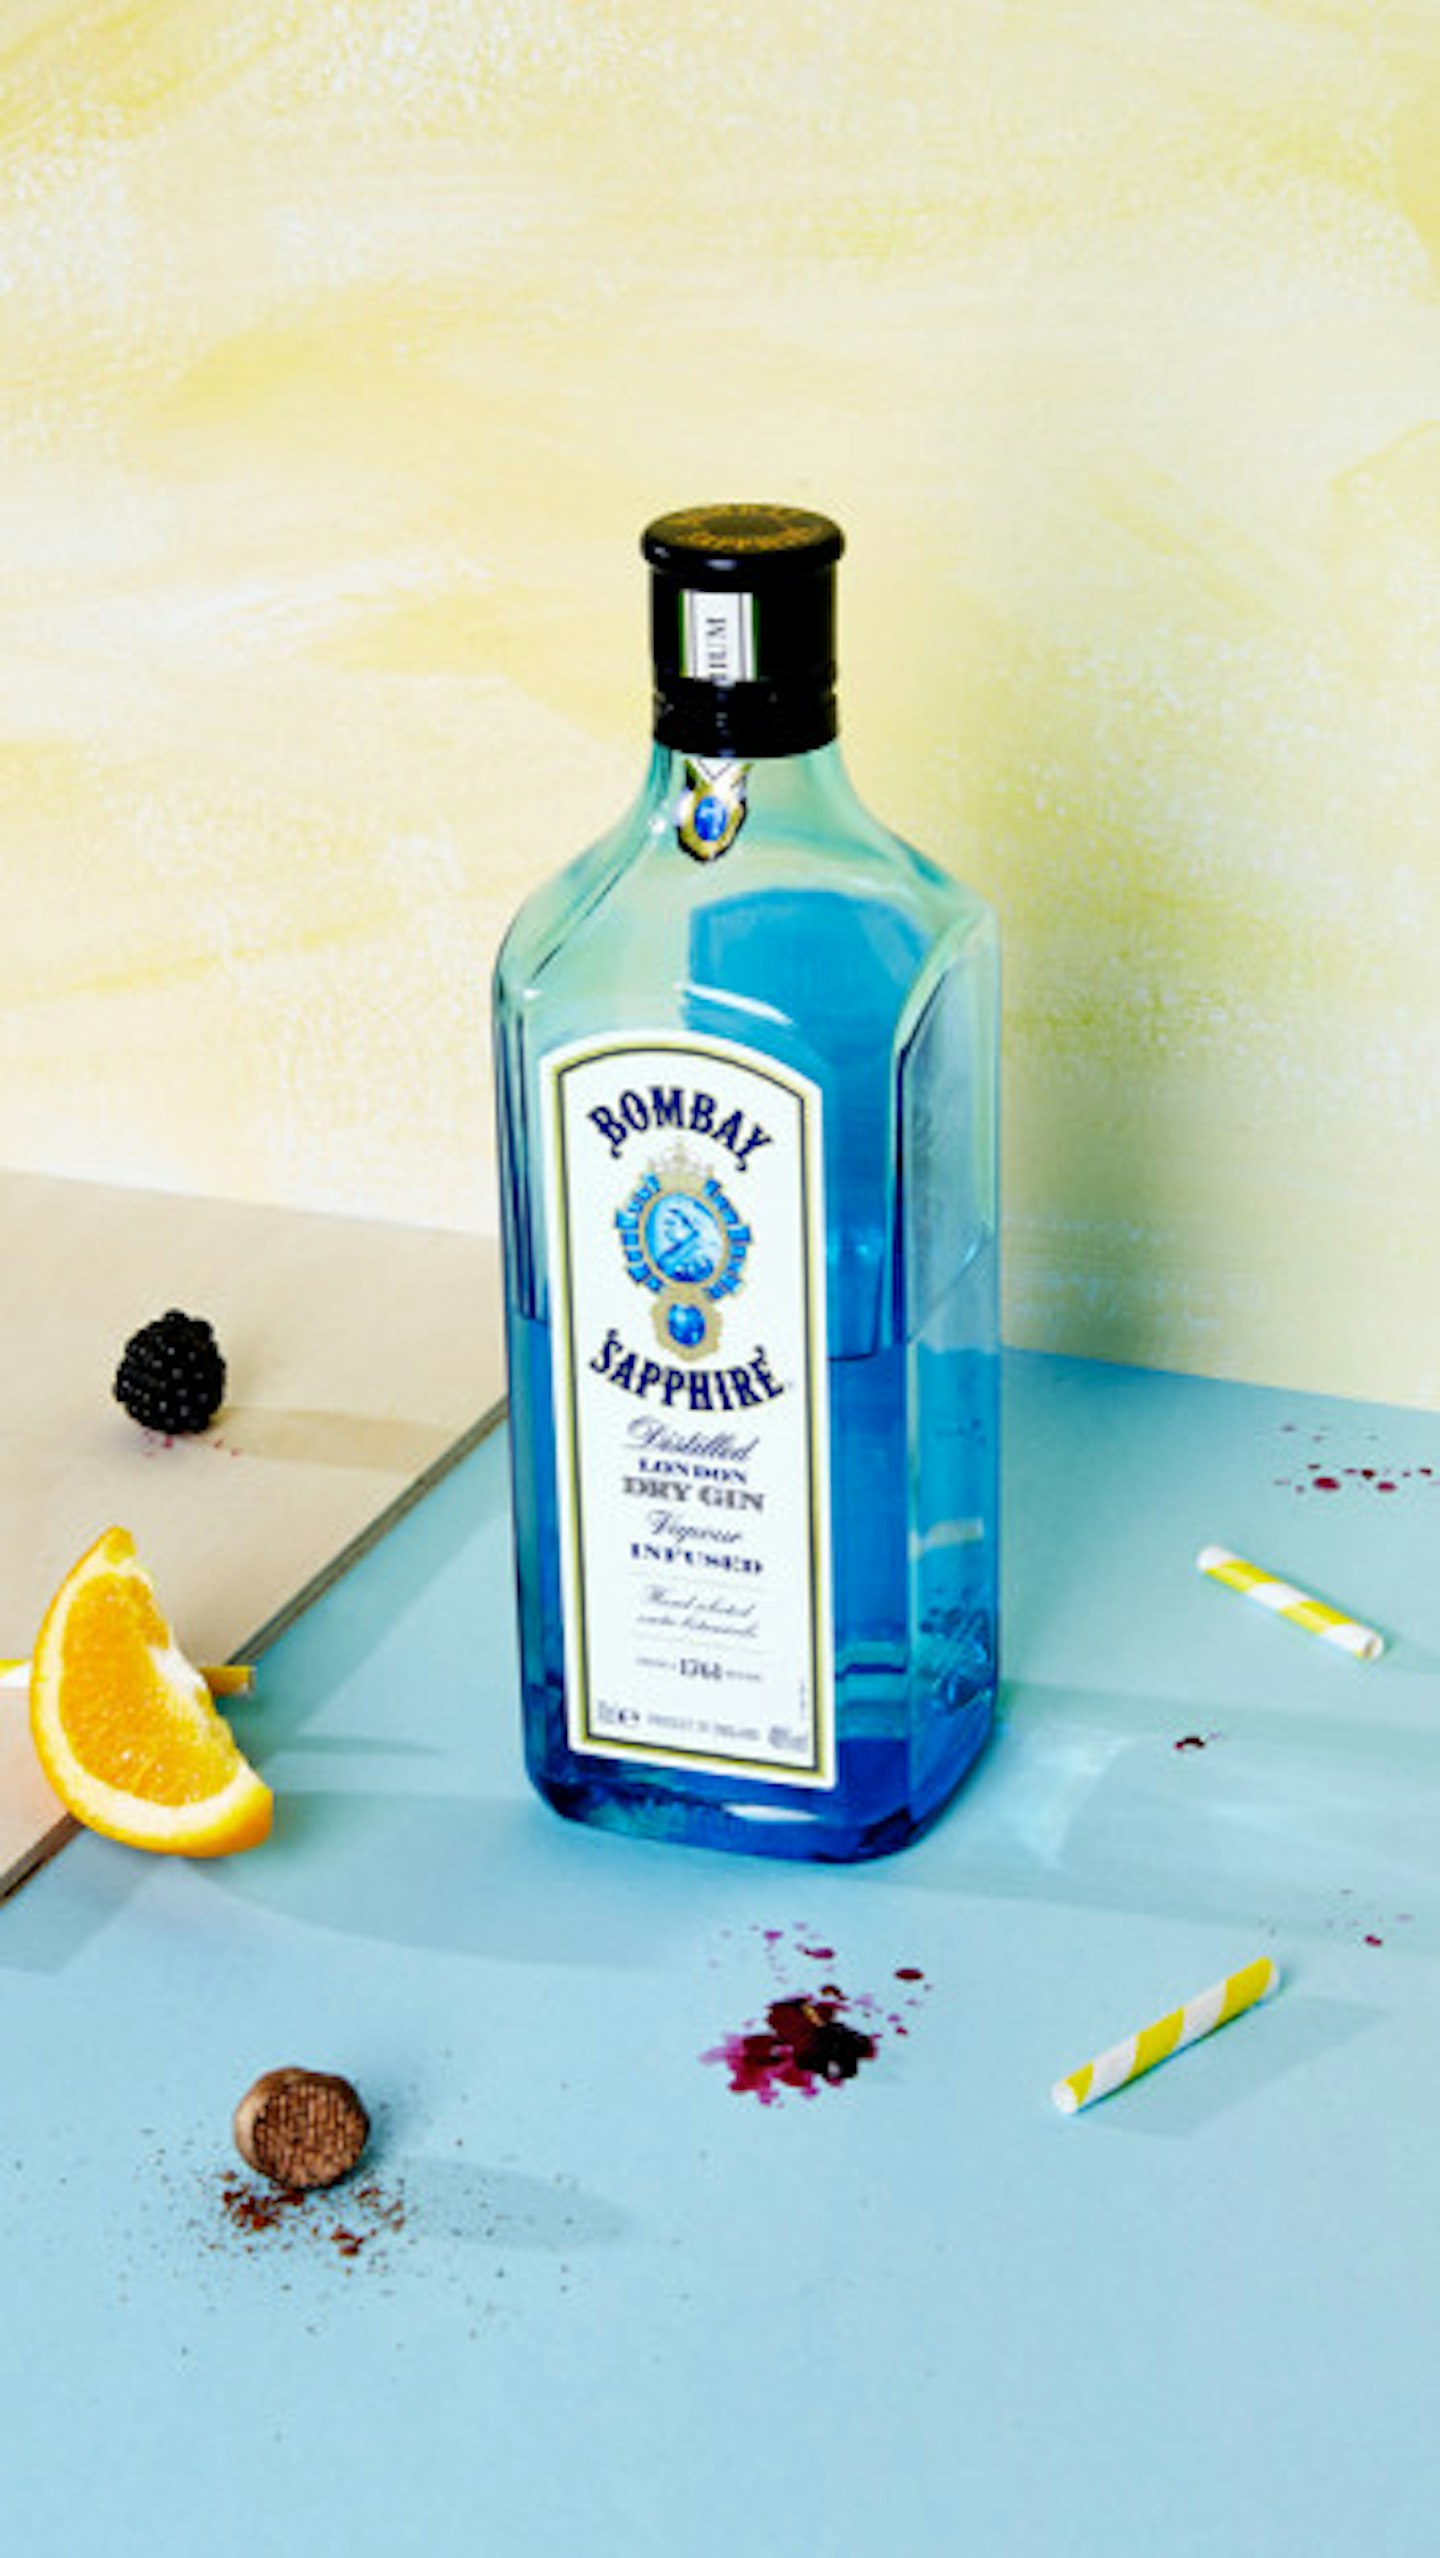 Take one bottle of Bombay Sapphire!